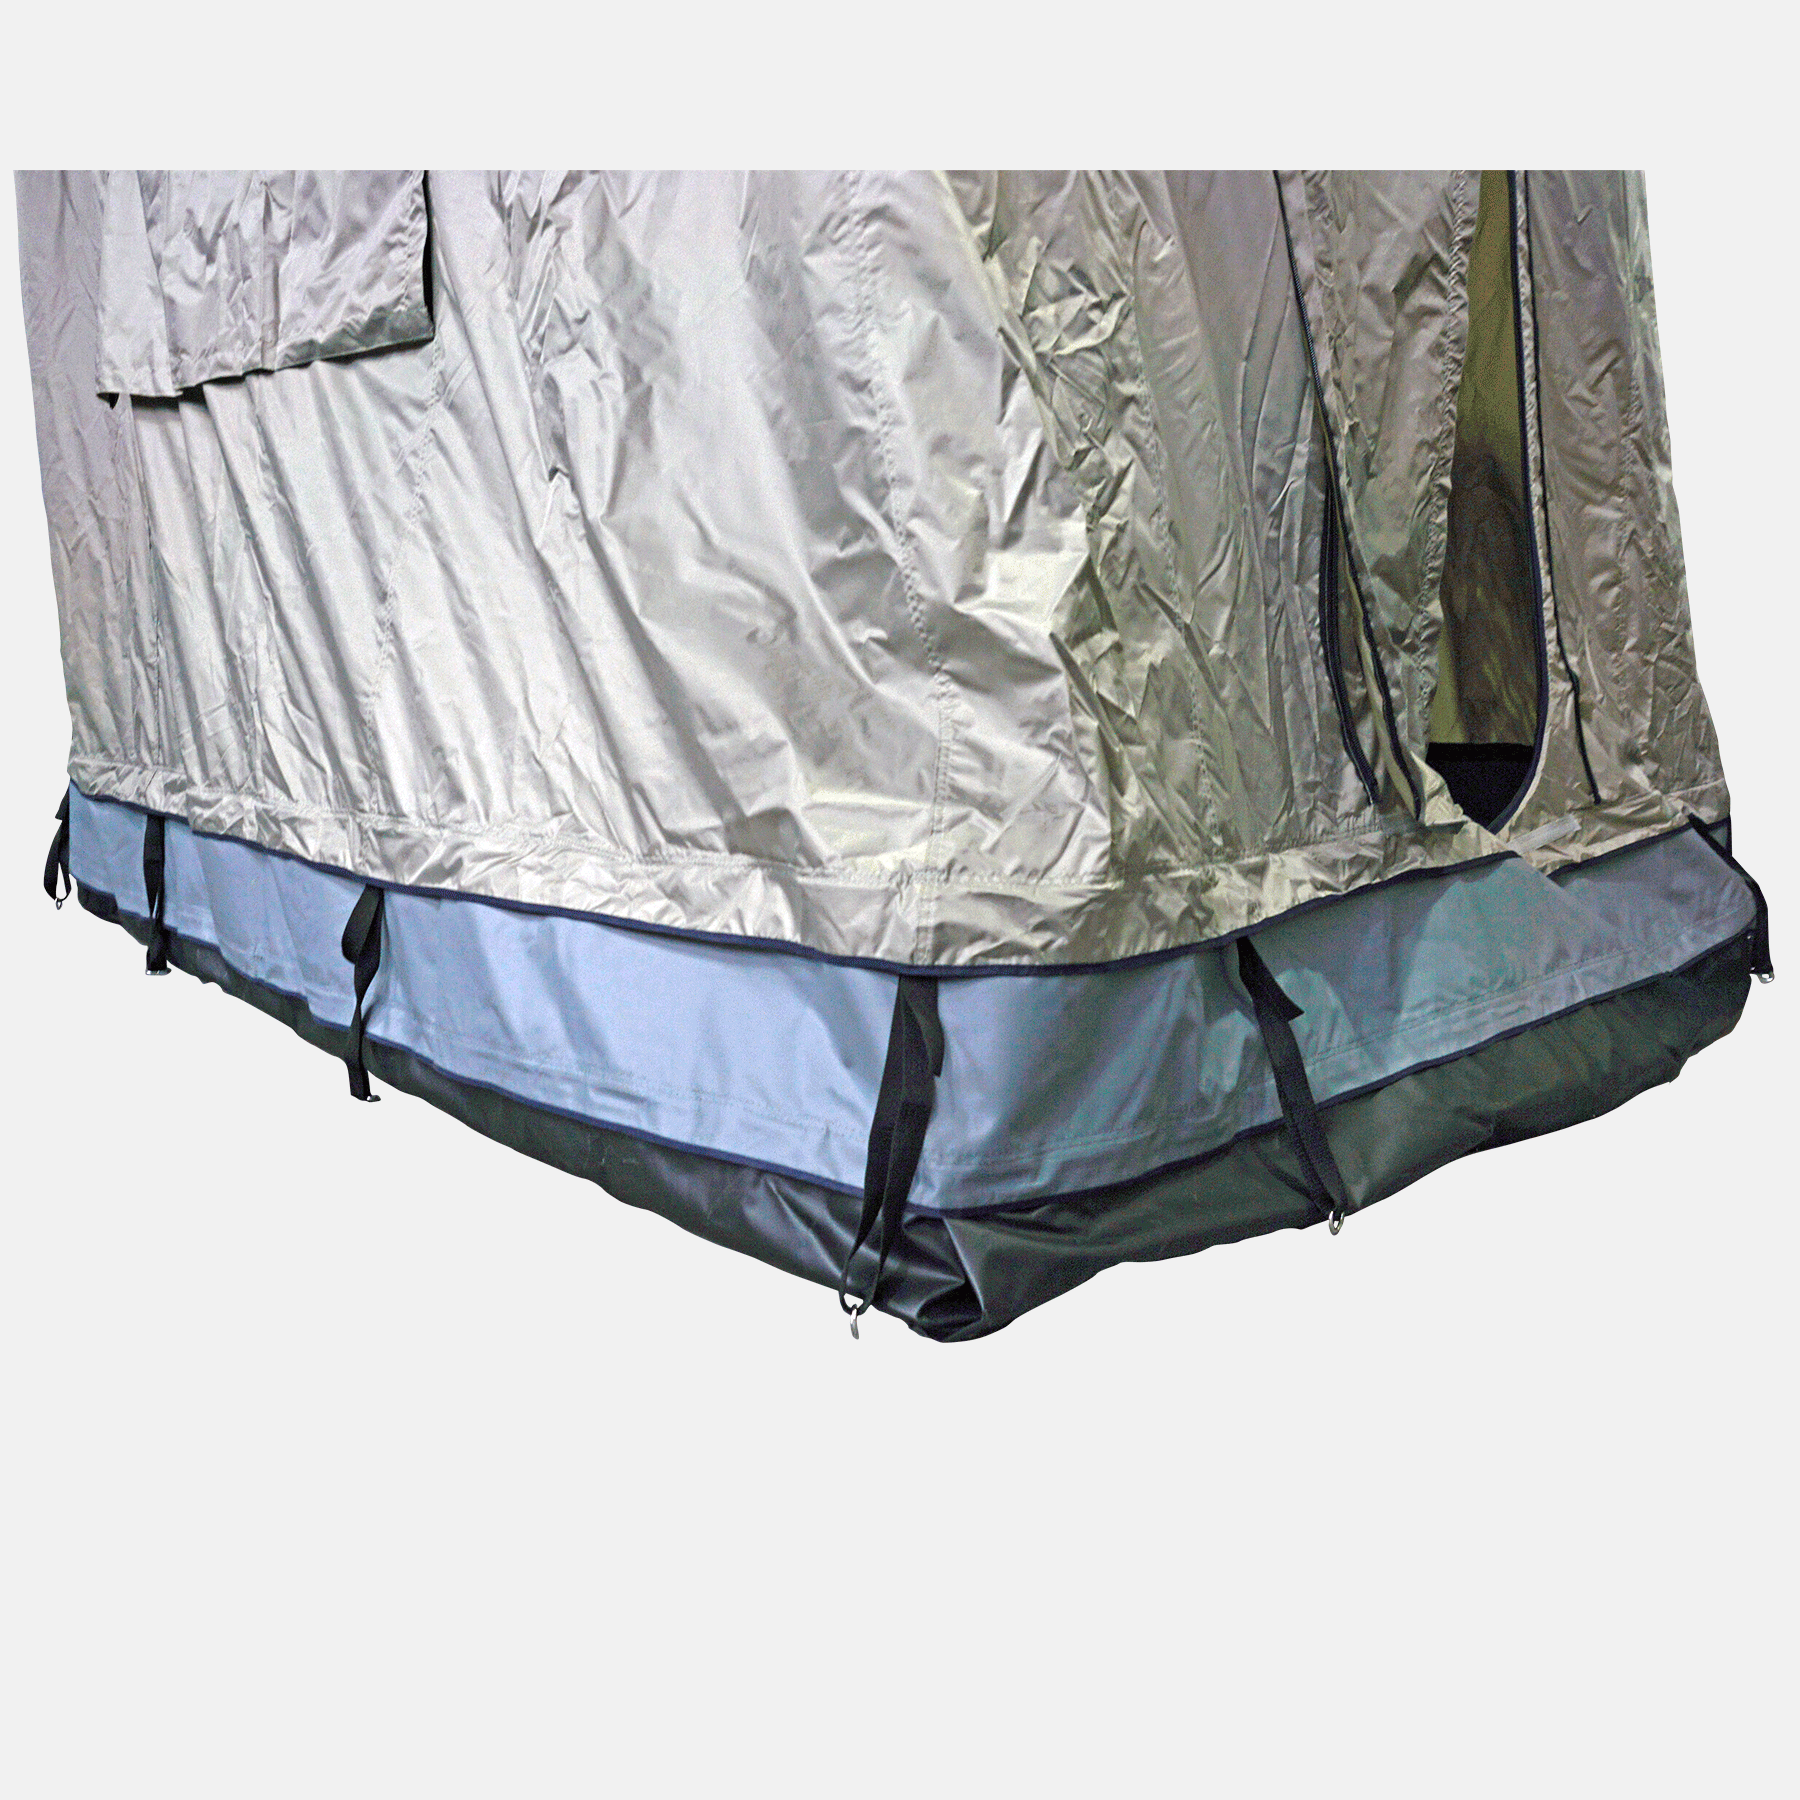 Annex room extension scarf with zipper for Desert roof tent